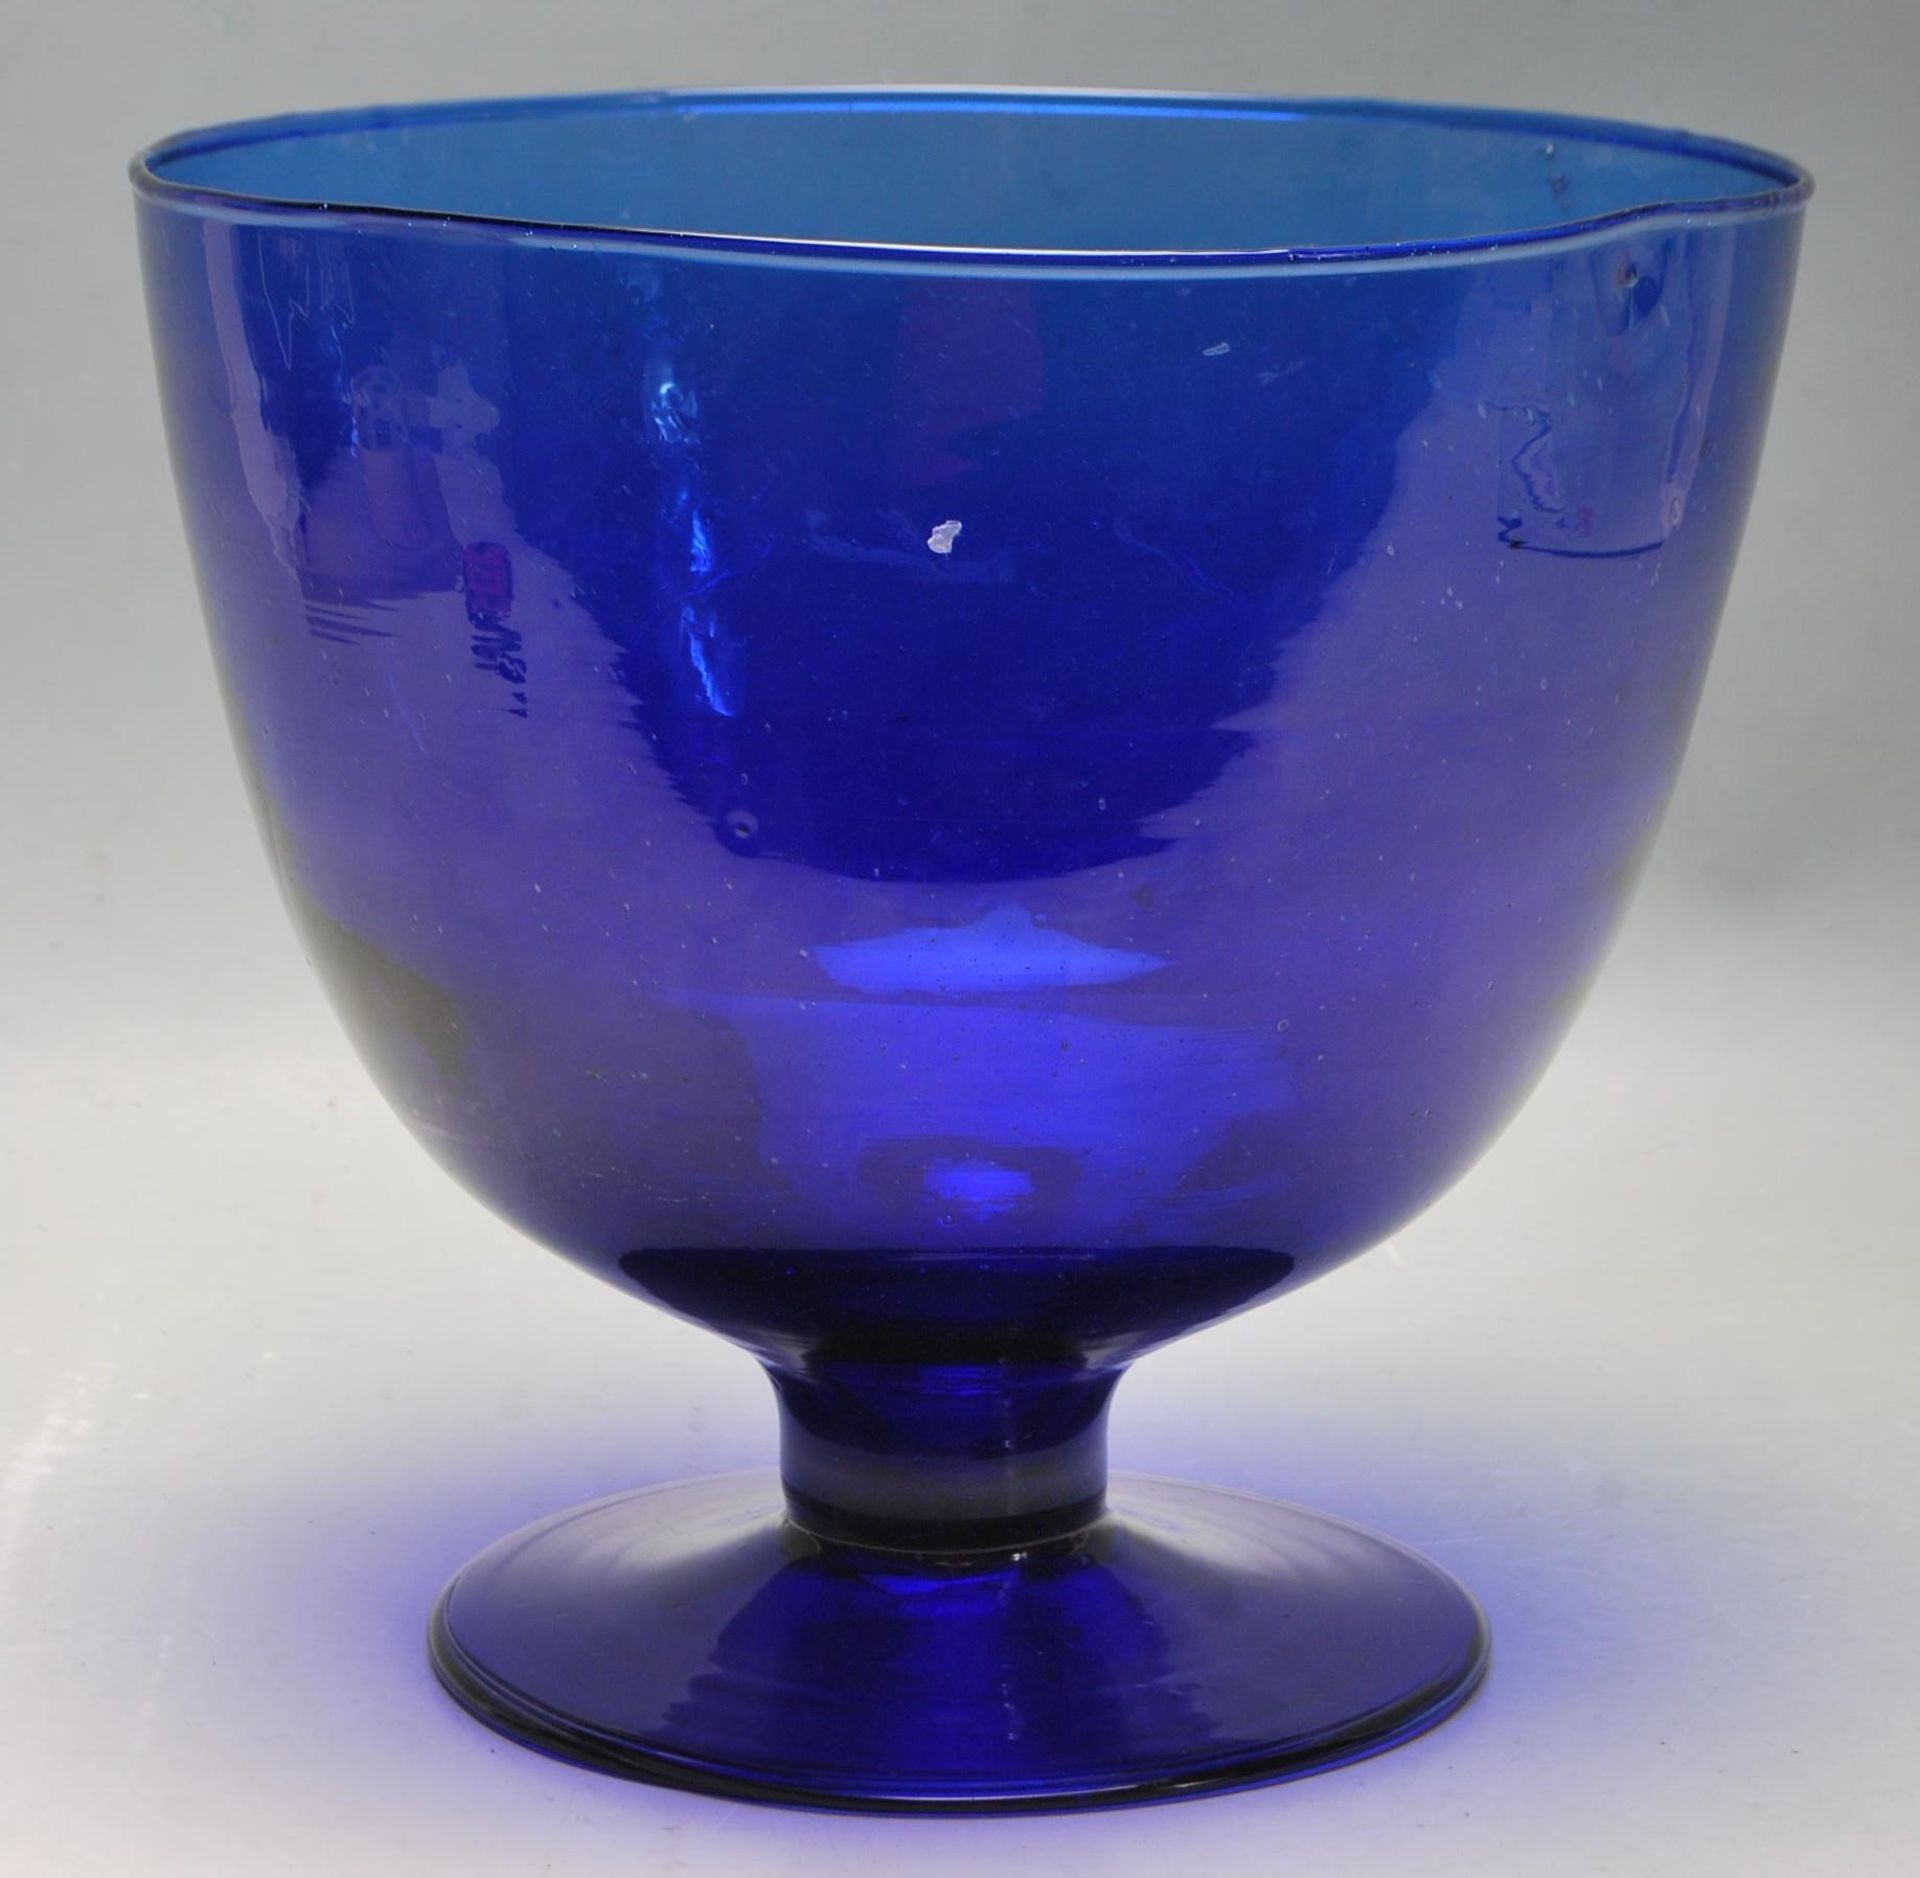 ANTIQUE BRISTOL BLUE GLASS FOOTED BOWL